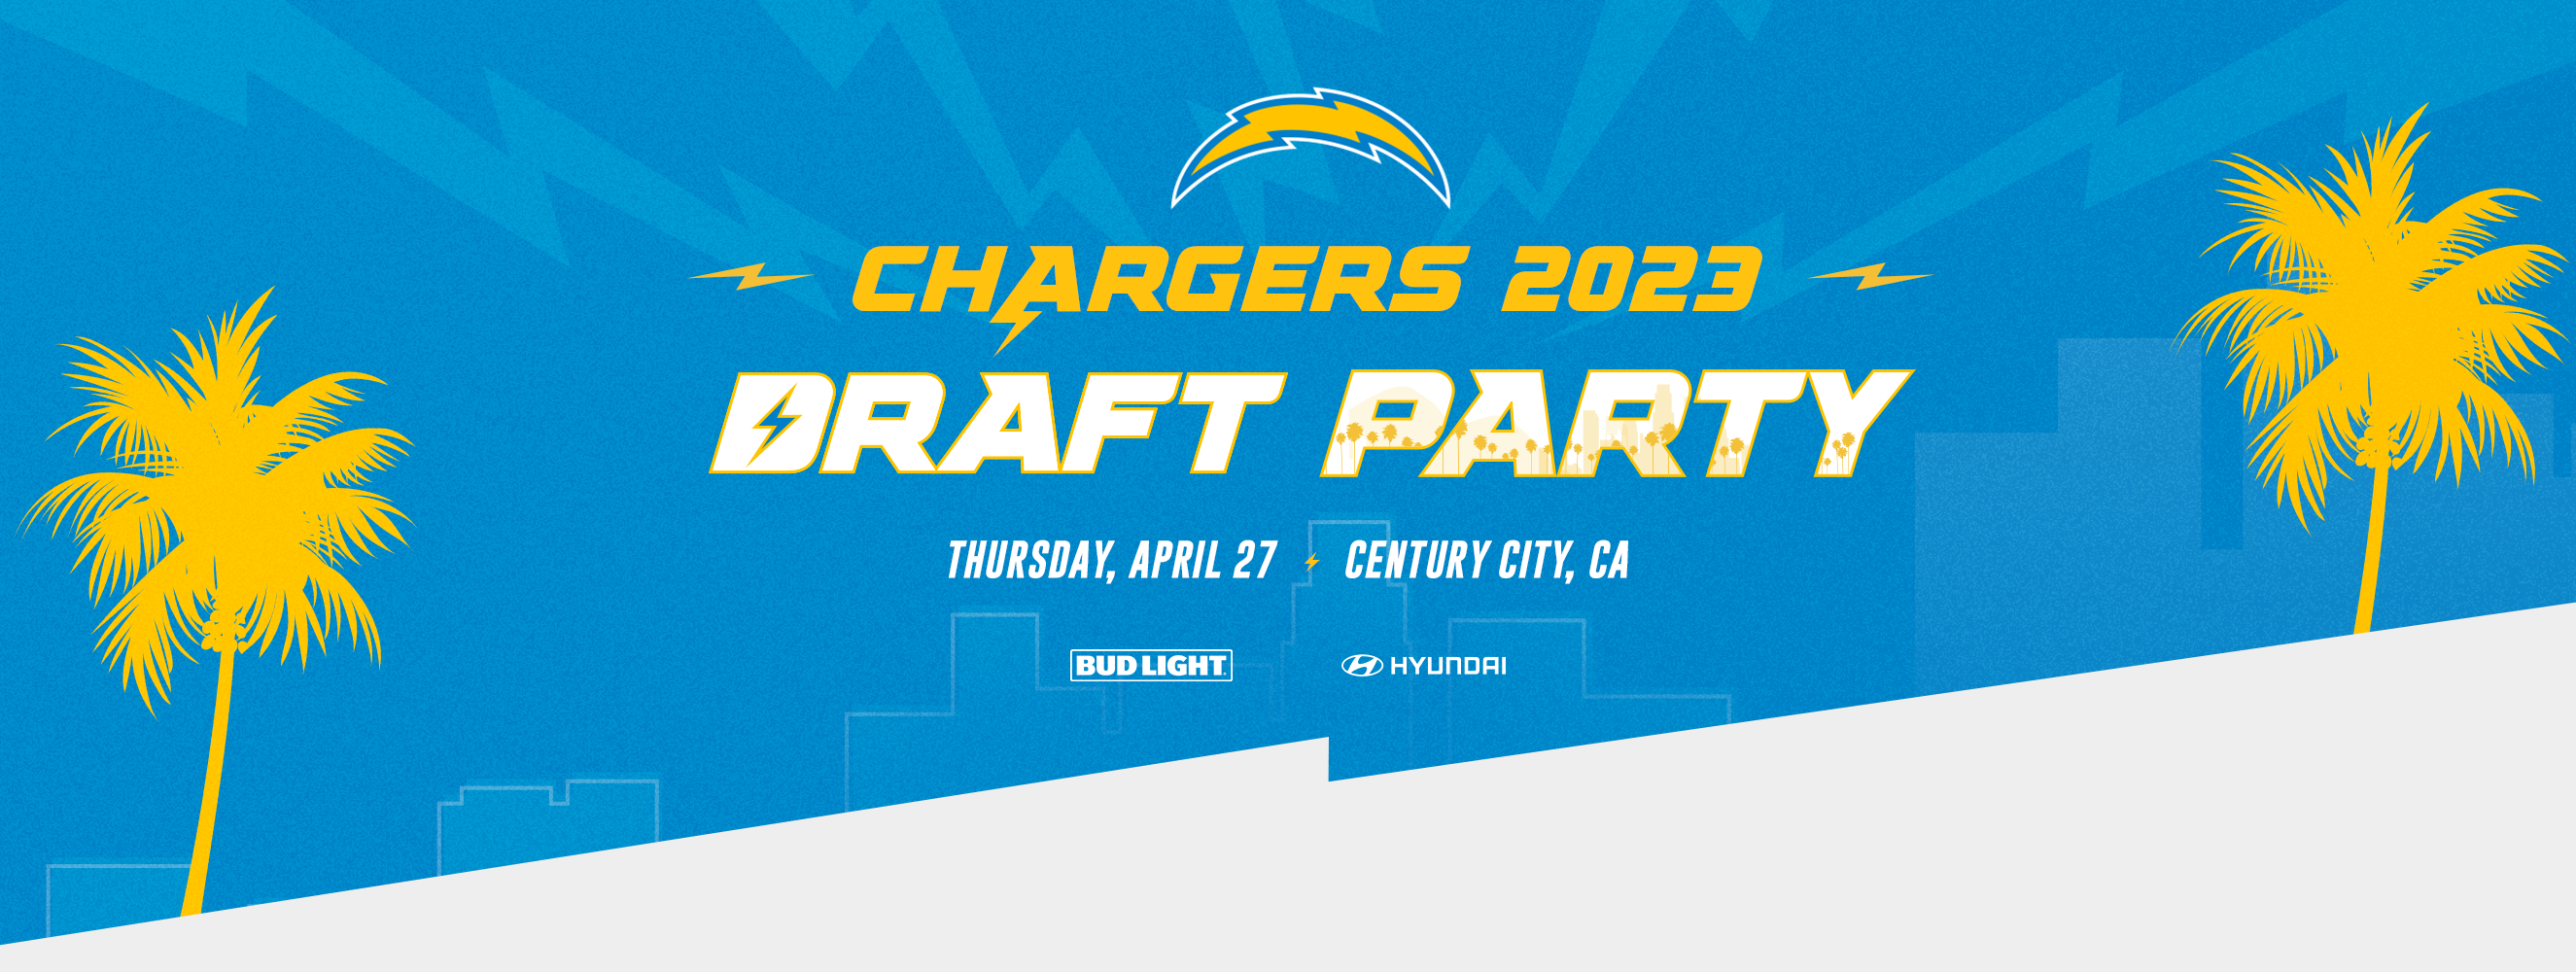 chargers draft fest